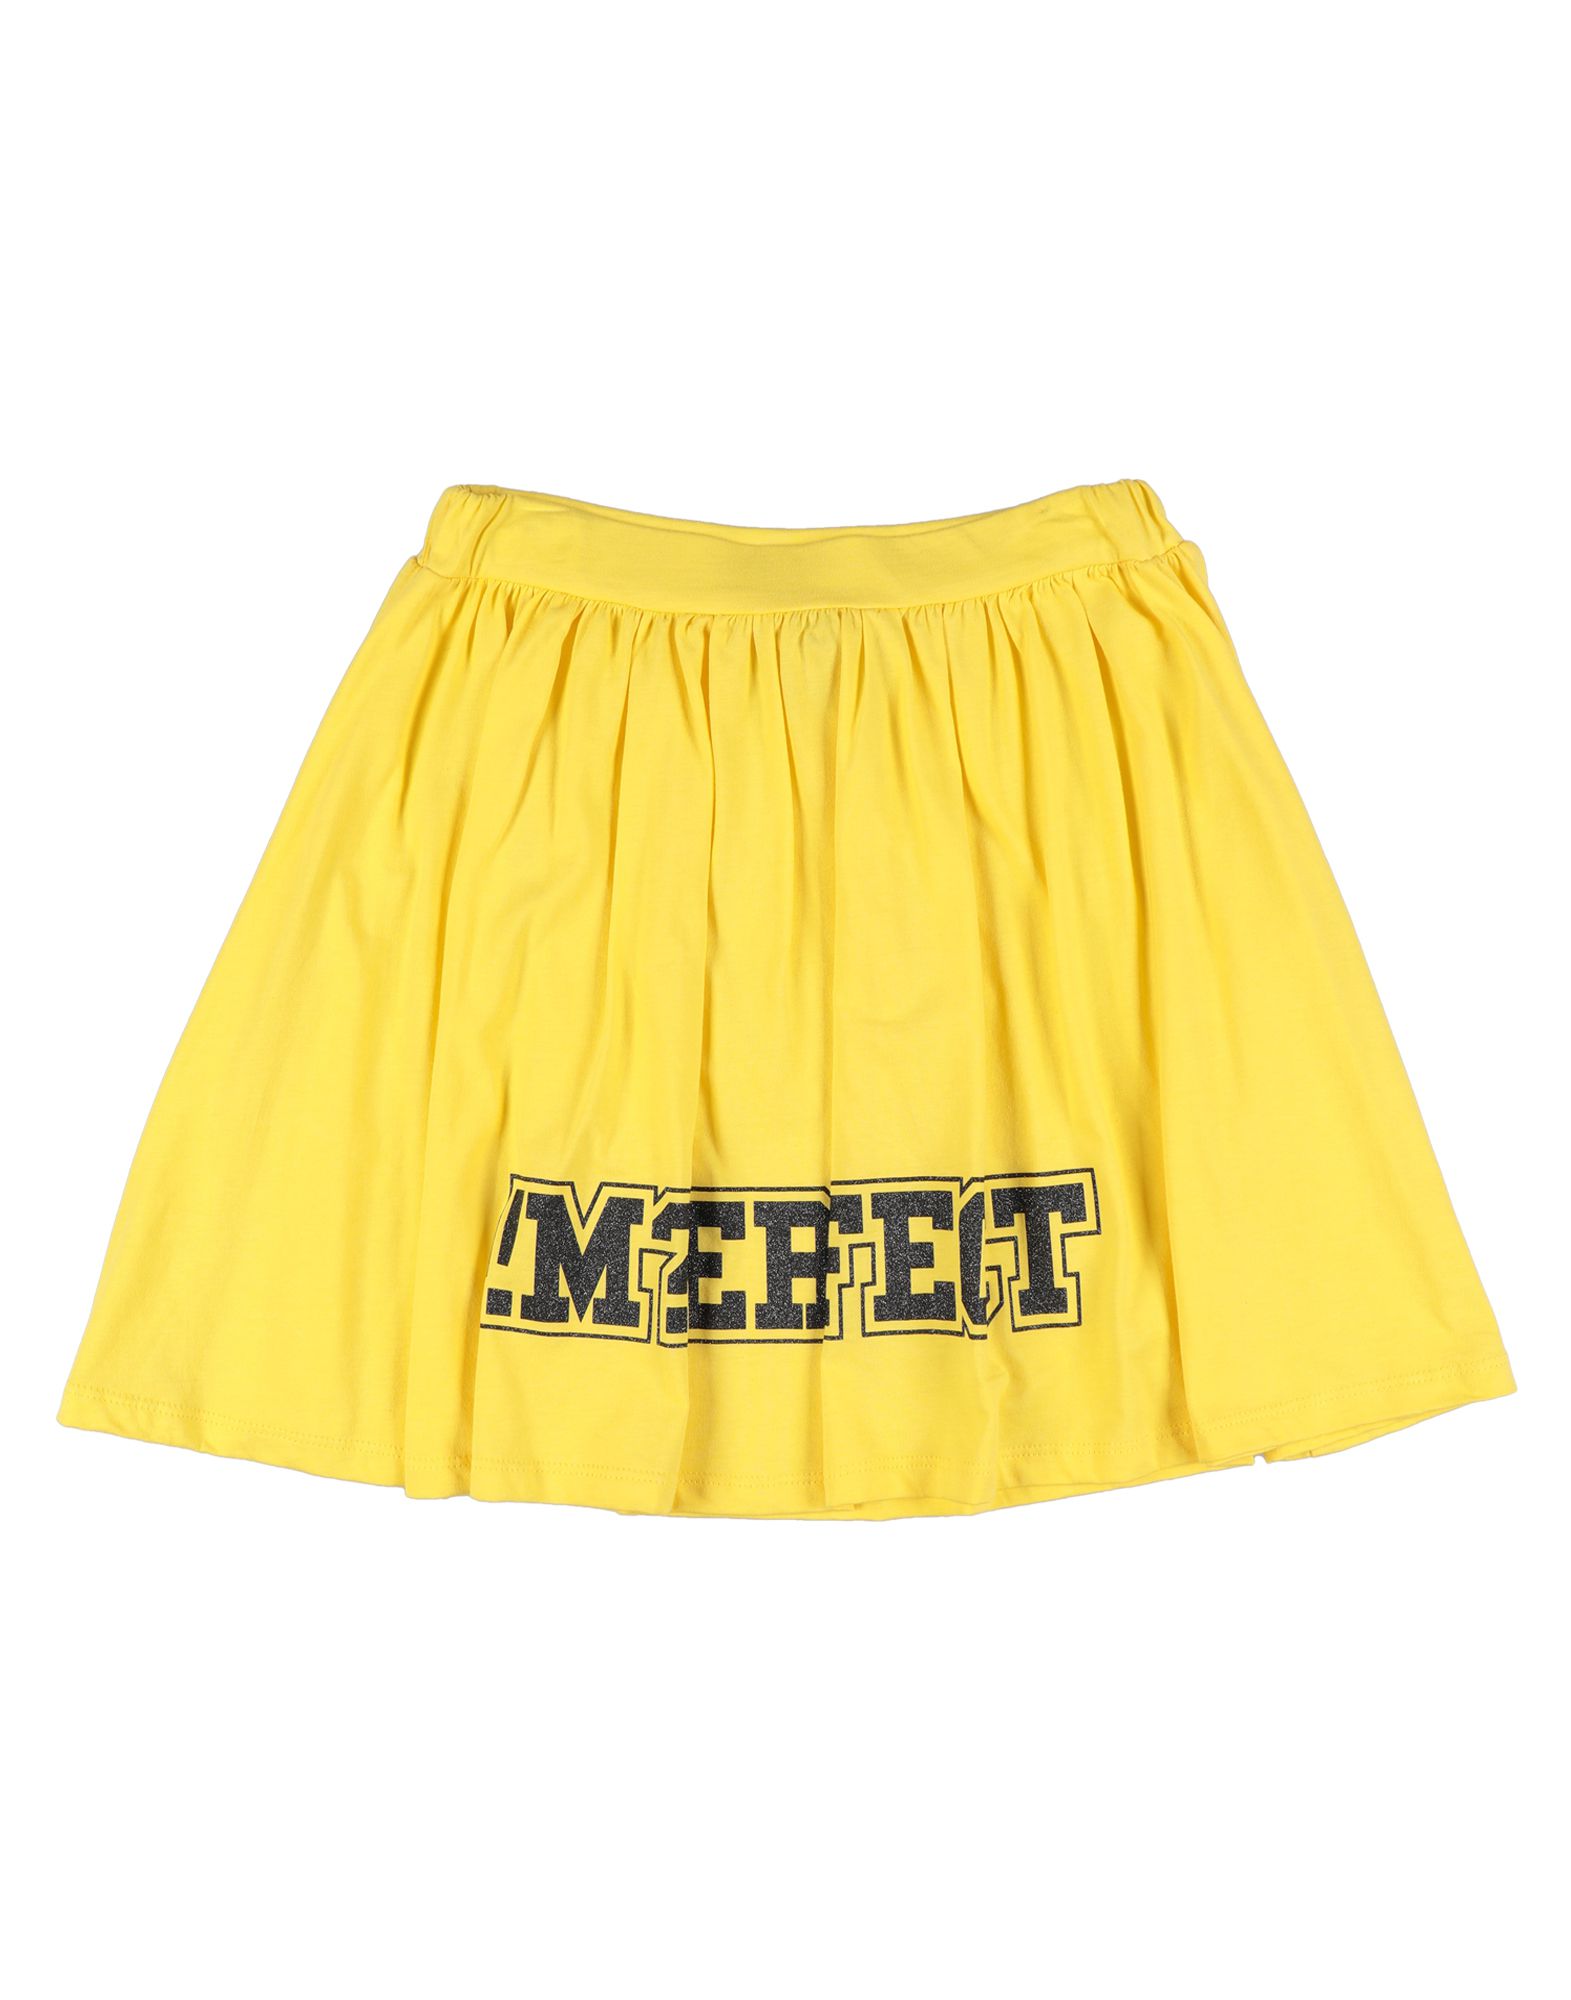 !m?erfect Kids' Skirts In Yellow